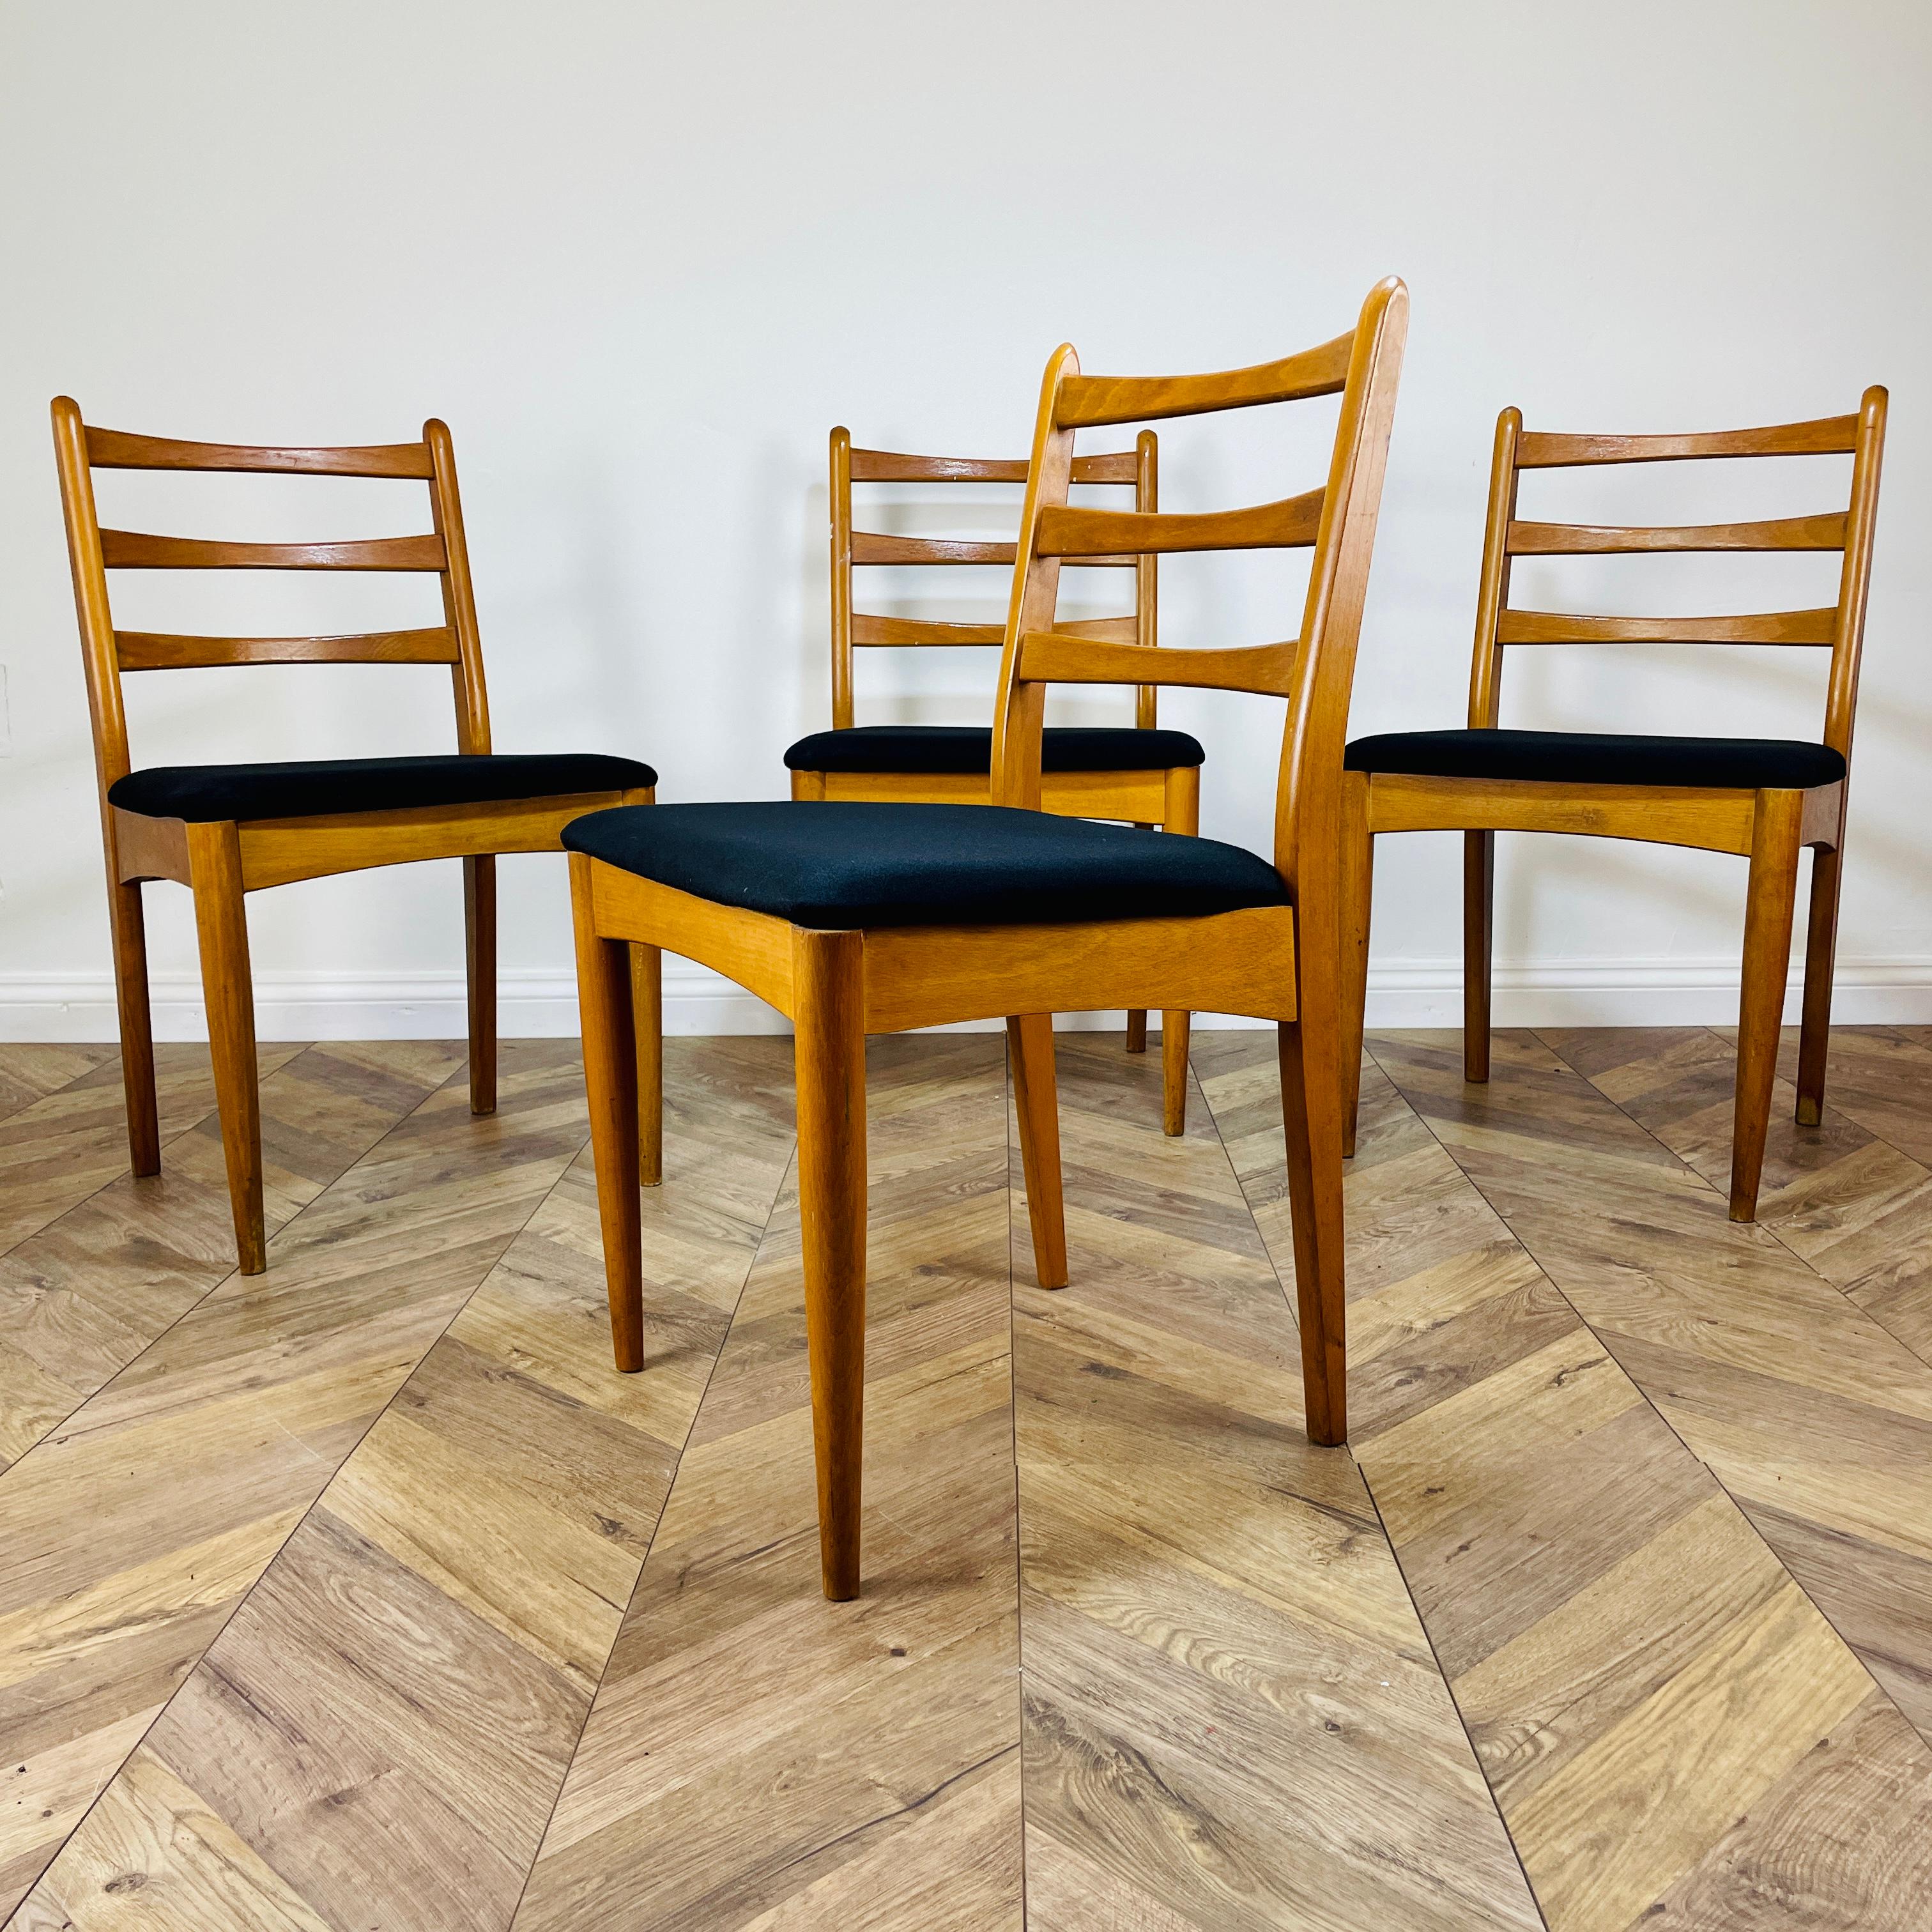 Stylish Set of 4 Vintage Dining Chairs, circa 1970s.

The chairs, which feature slatted backs and upholstered seats, were produced in Czechoslovakia by Ligna Drevounia. (makers mark to underside).

The frames are in good vintage condition with